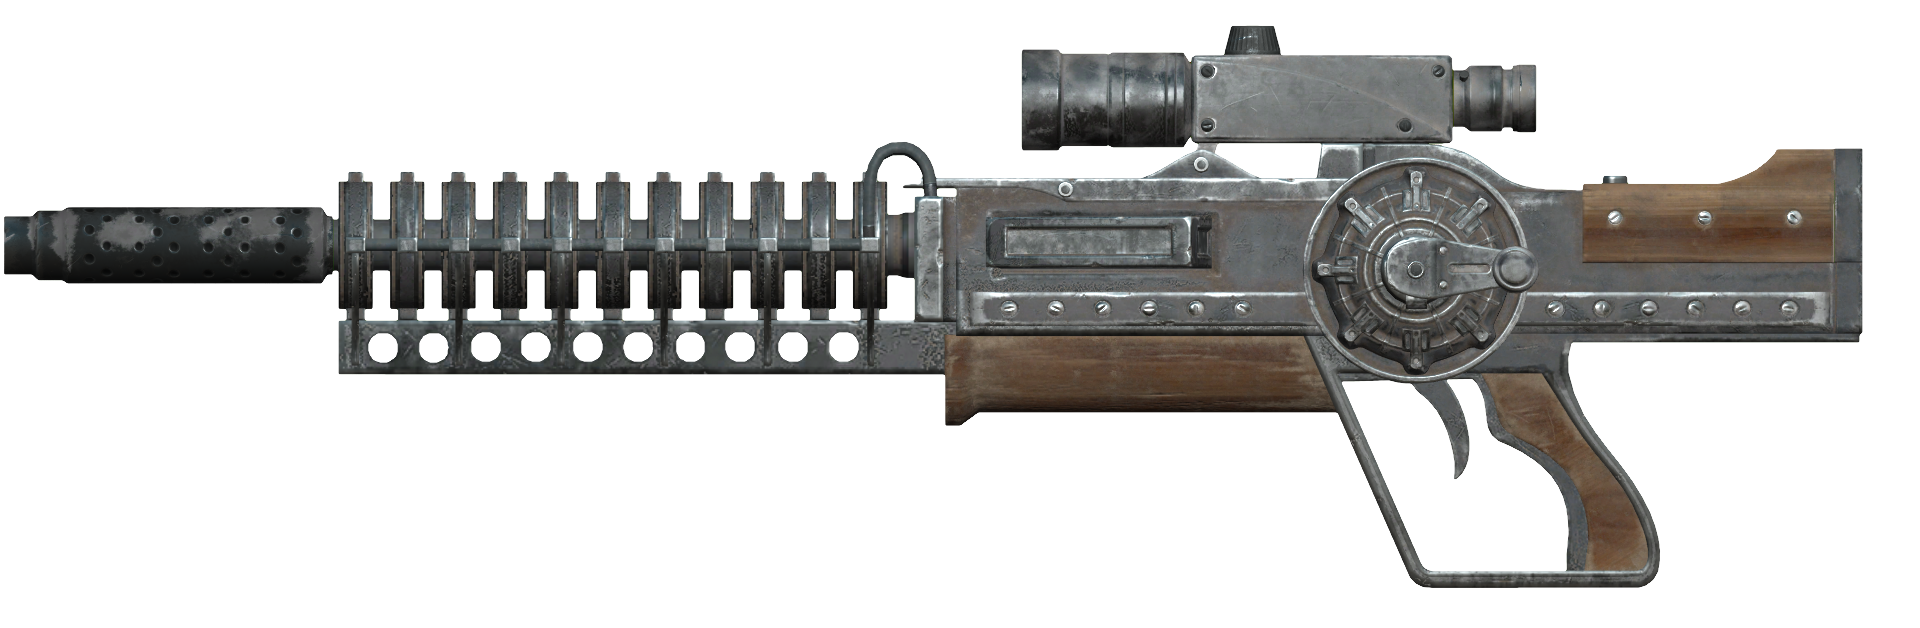 Category Creation Club Weapon Images Fallout Wiki Fandom